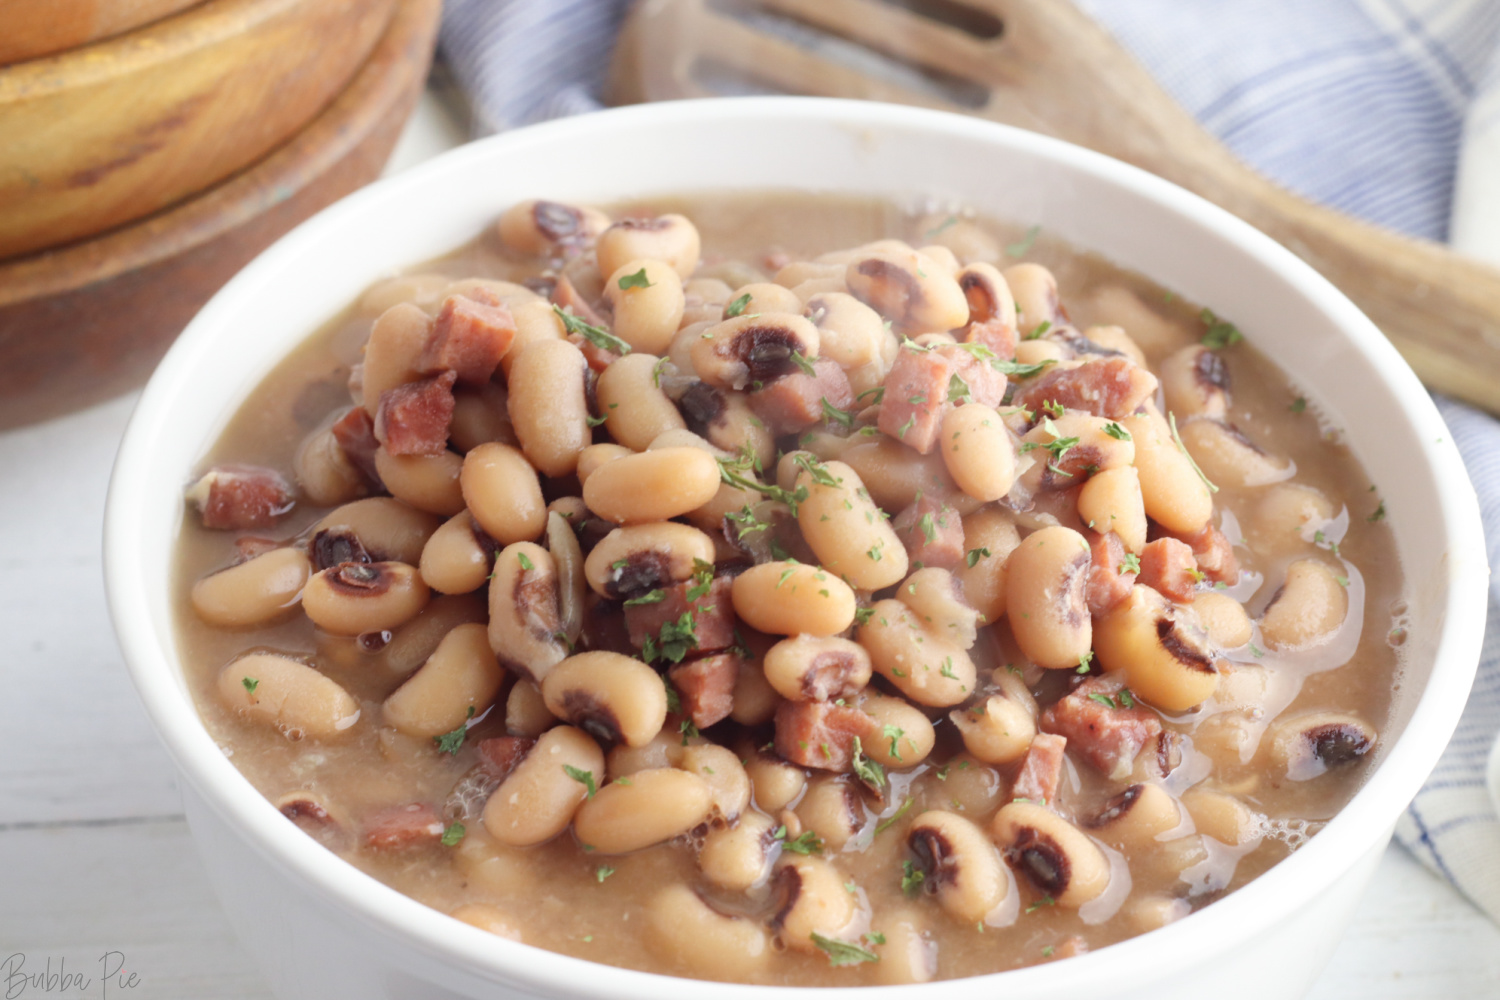 Slow Cooker Black Eyed Peas is a traditional soul food recipe for new years.